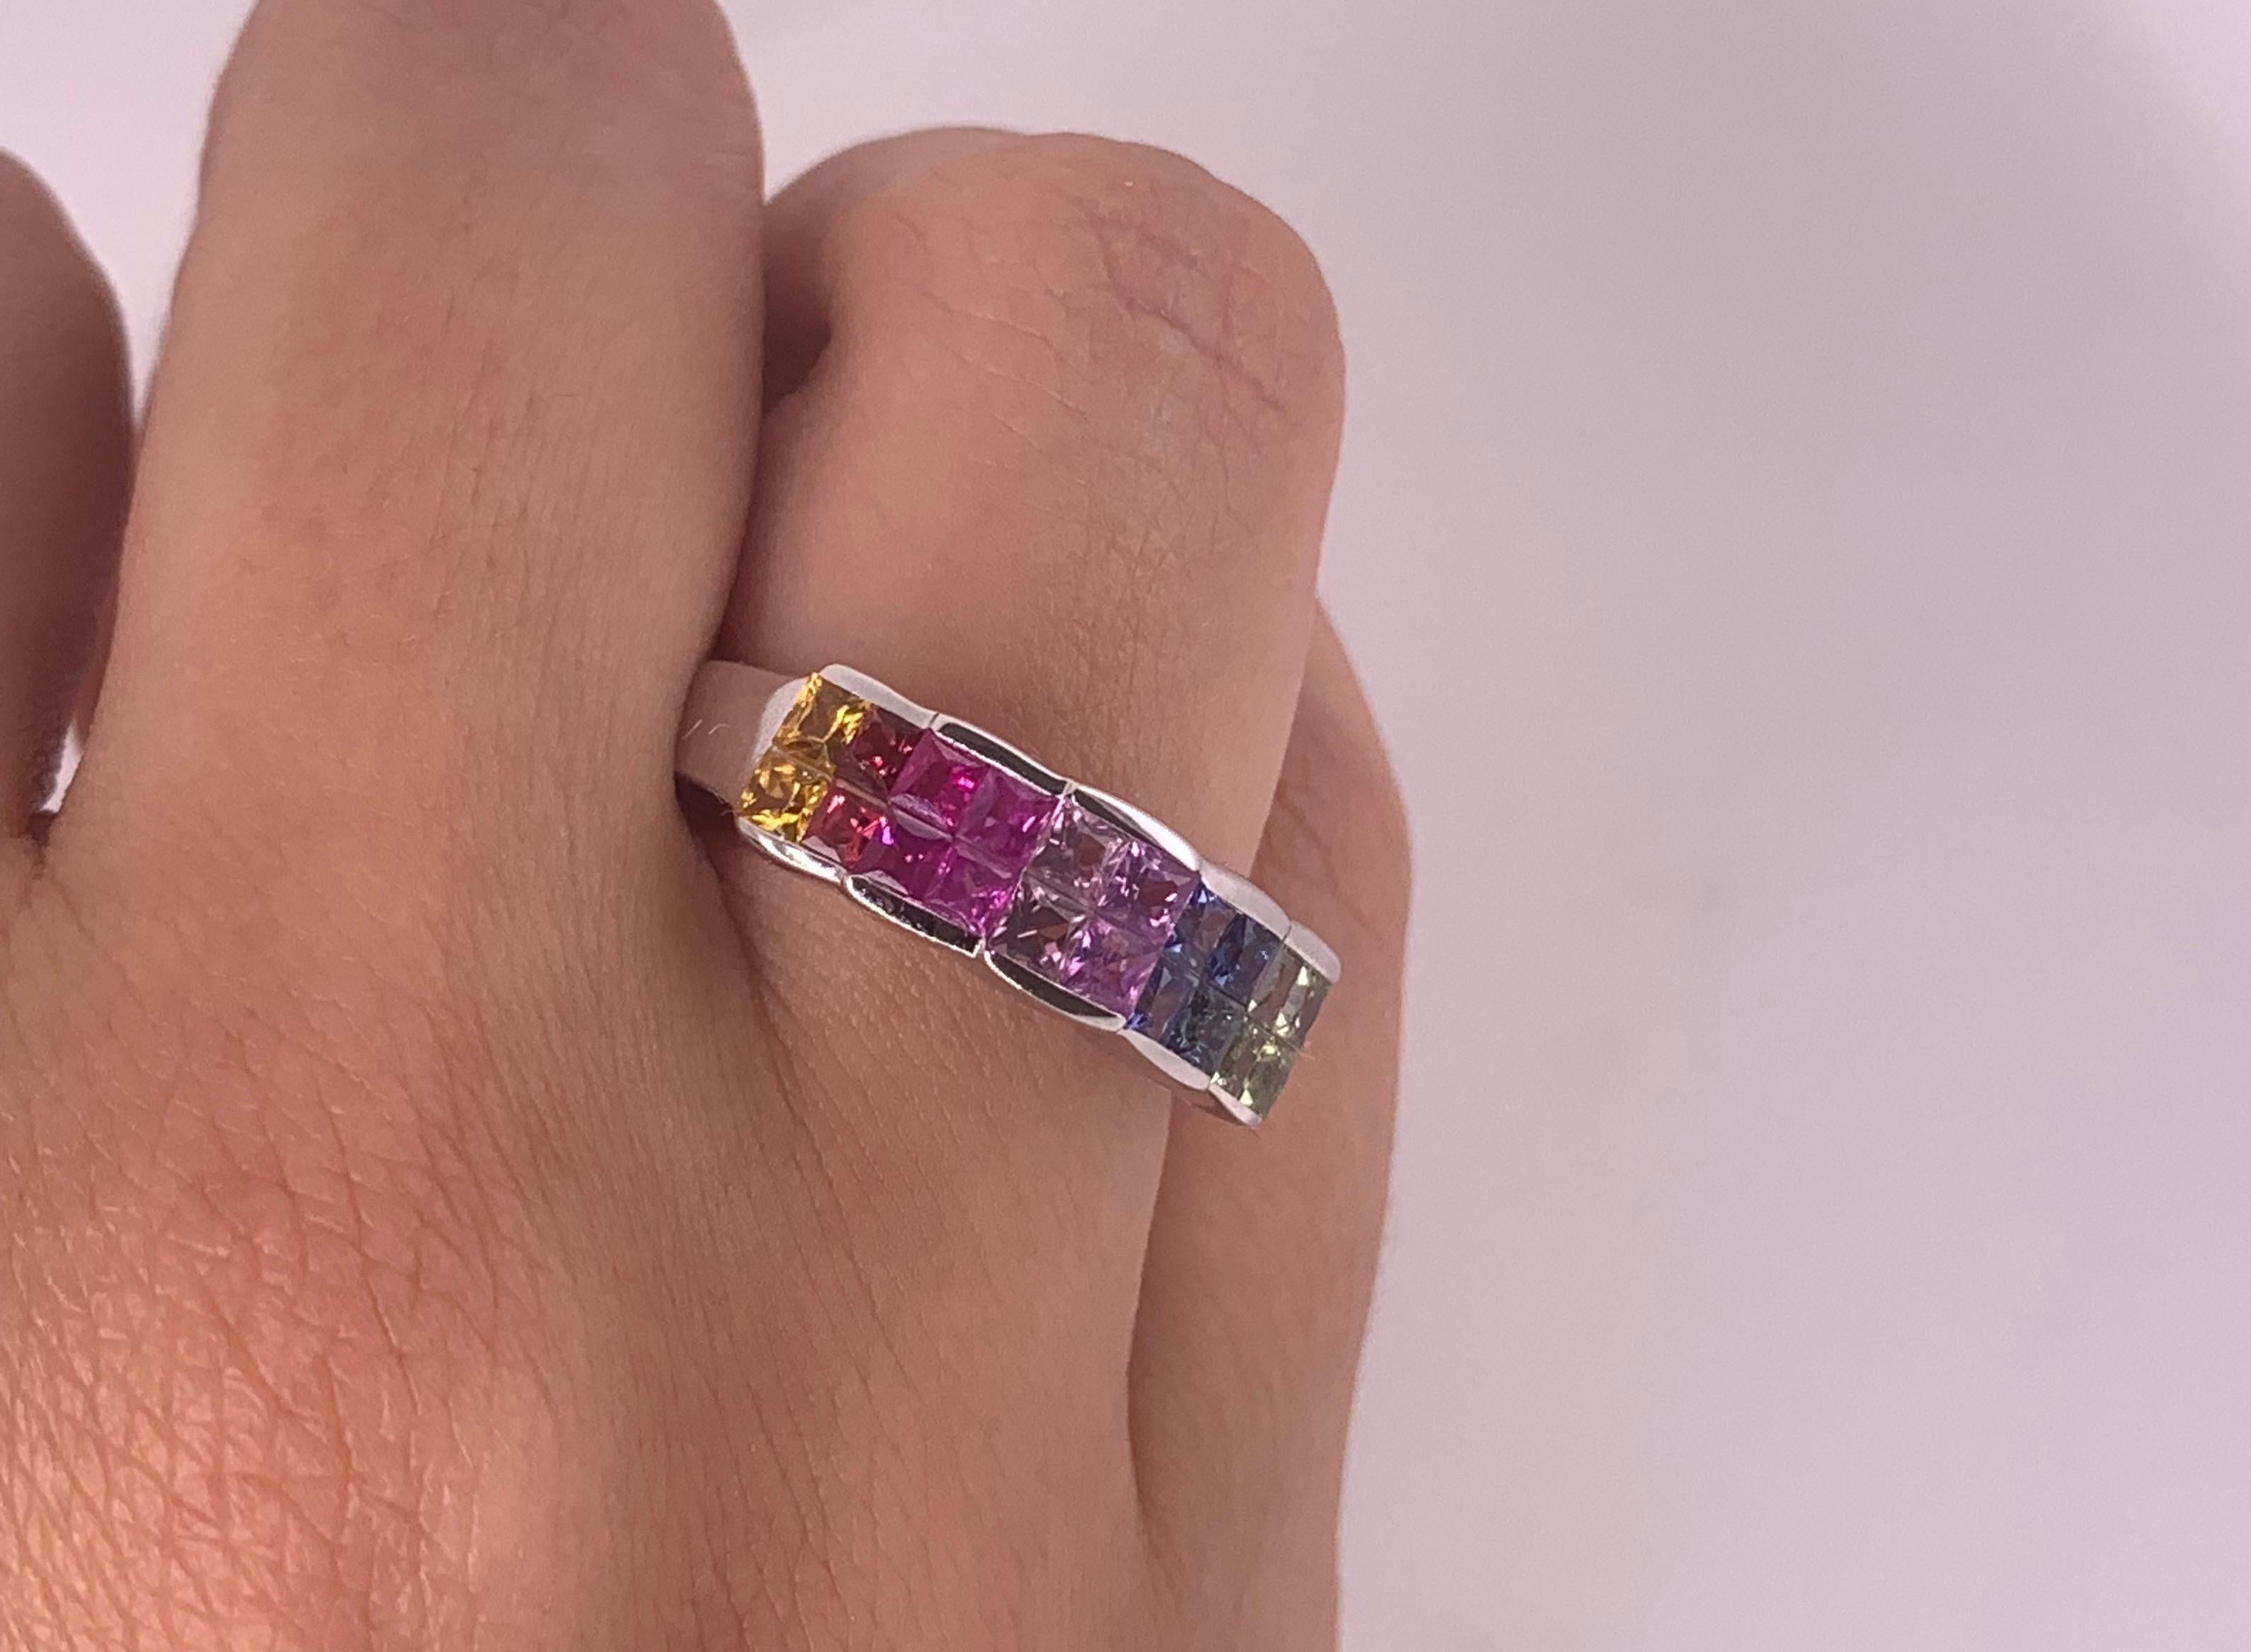 Material: 14k White Gold 
Stone Details:  20 Princess Cut Multicolor Sapphires - at 2 Carats - Blue, Pink, Red, Green, Yellow

Alberto offers complimentary sizing on all rings.

Fine one-of-a-kind craftsmanship meets incredible quality in this